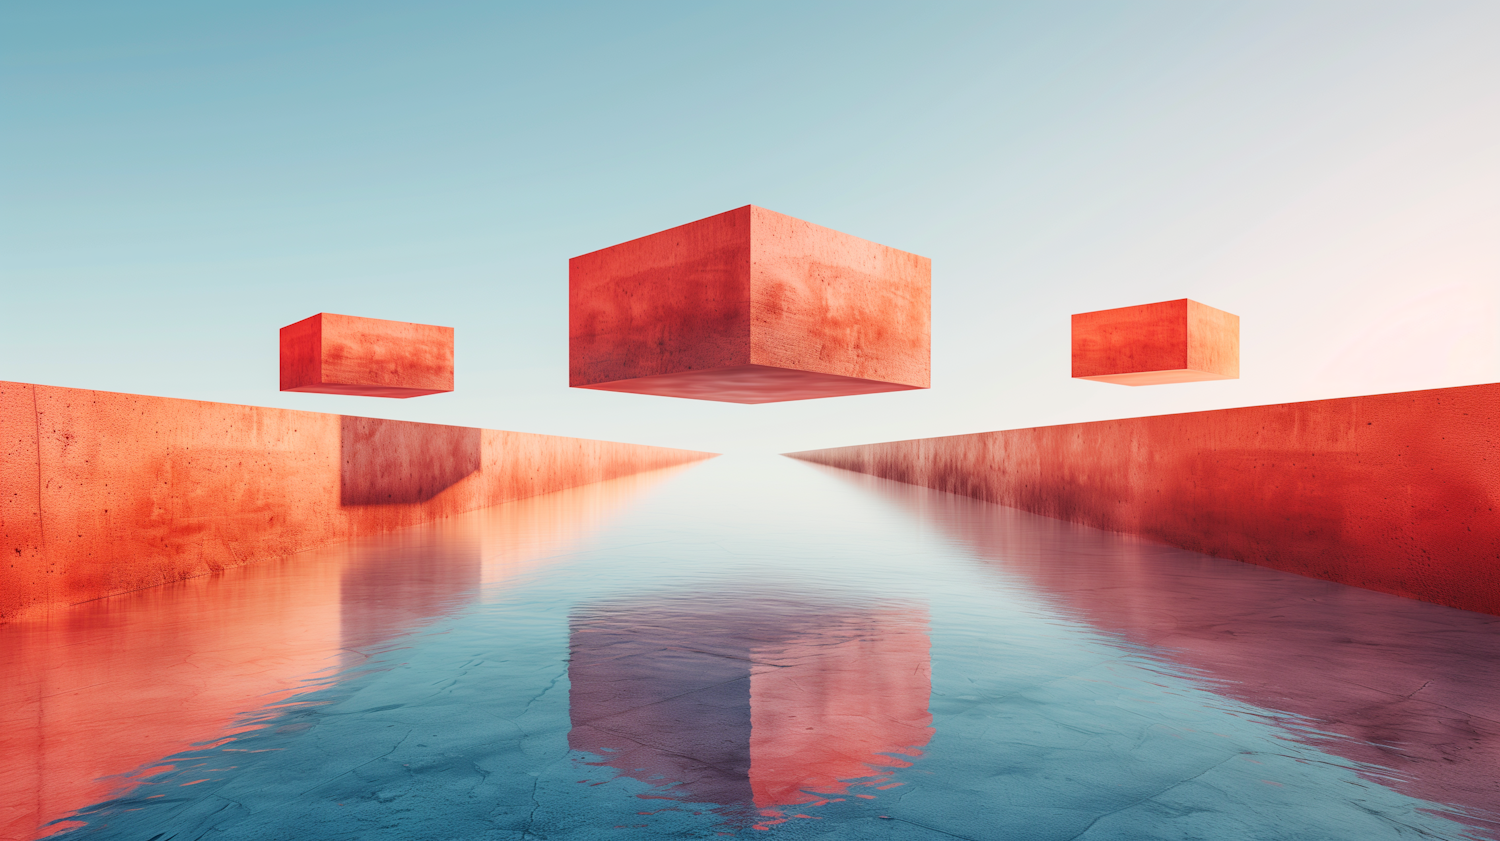 Floating Red Parallelepiped